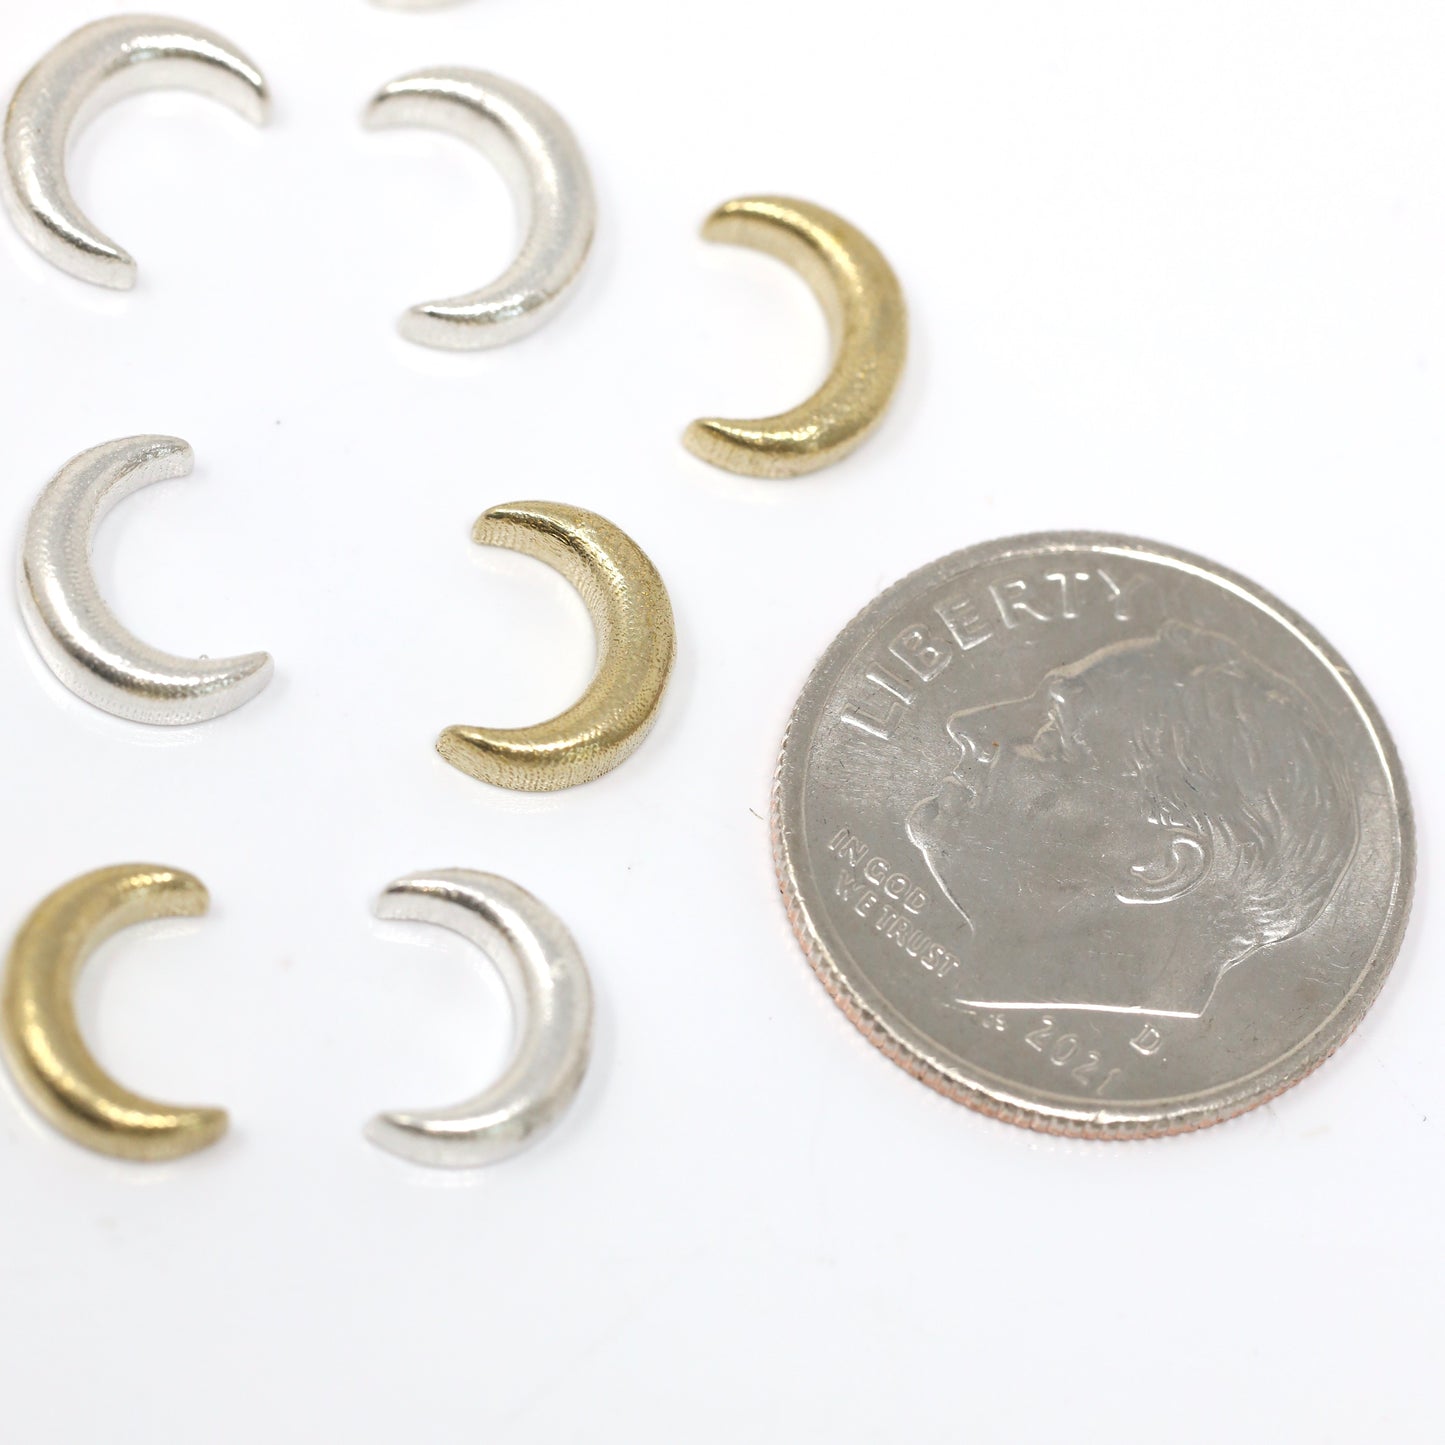 Big Crescent Moon Accent Charm Embellishments for Soldering or Jewelry Making